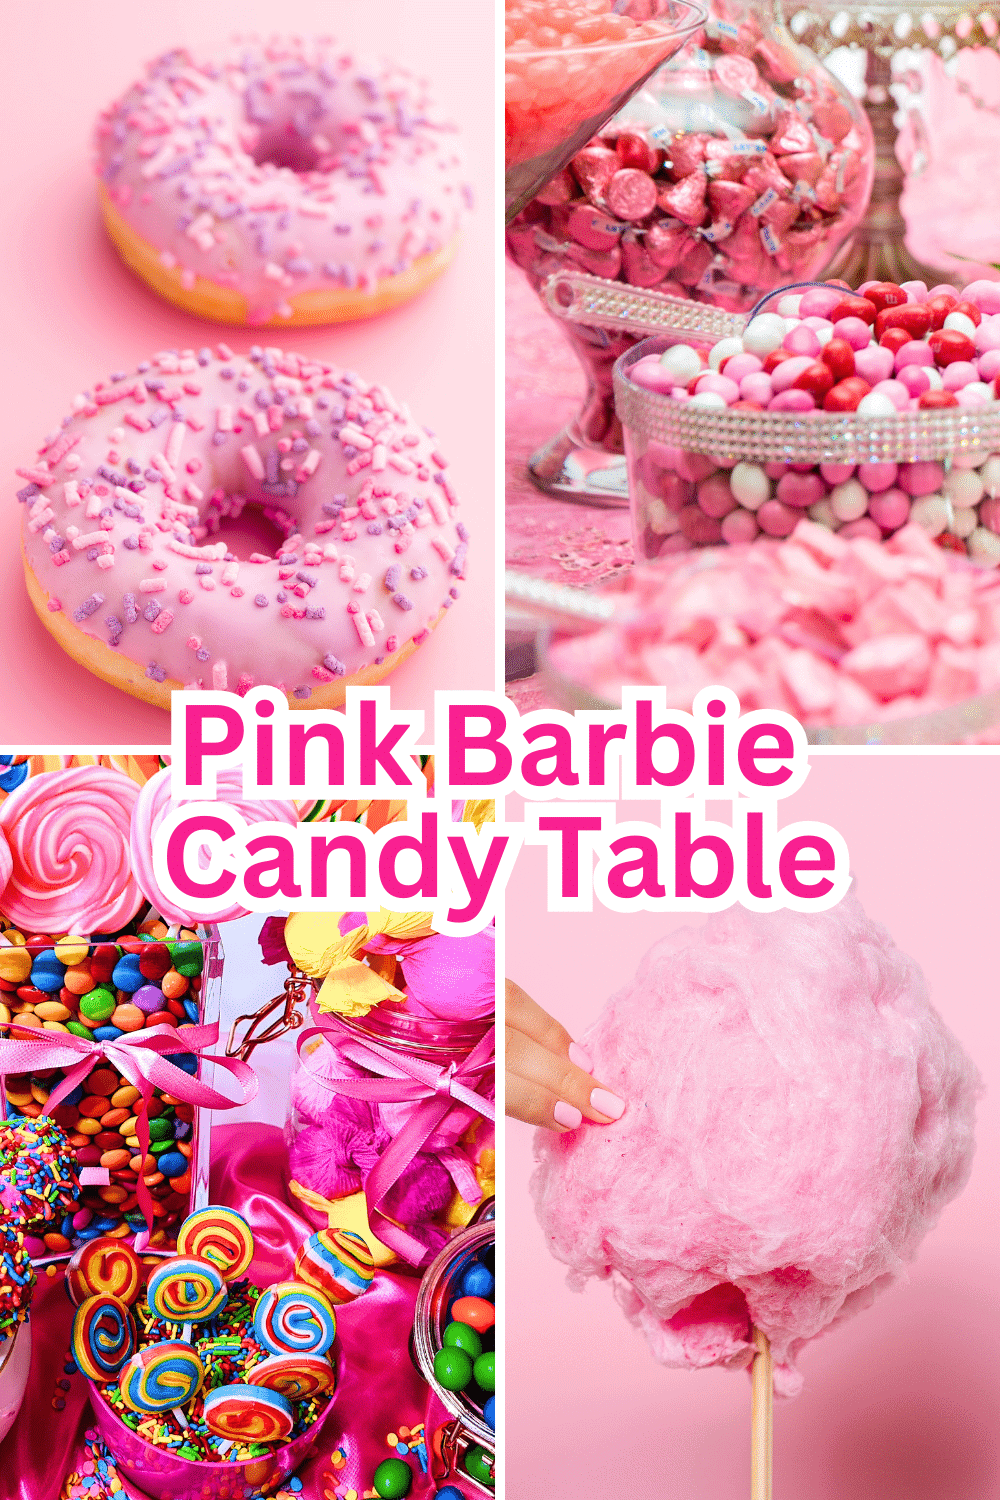 Pink Barbie Candy Table Ideas DIFFERENT PICTURES OF PINK CANDY BAR ITEMS